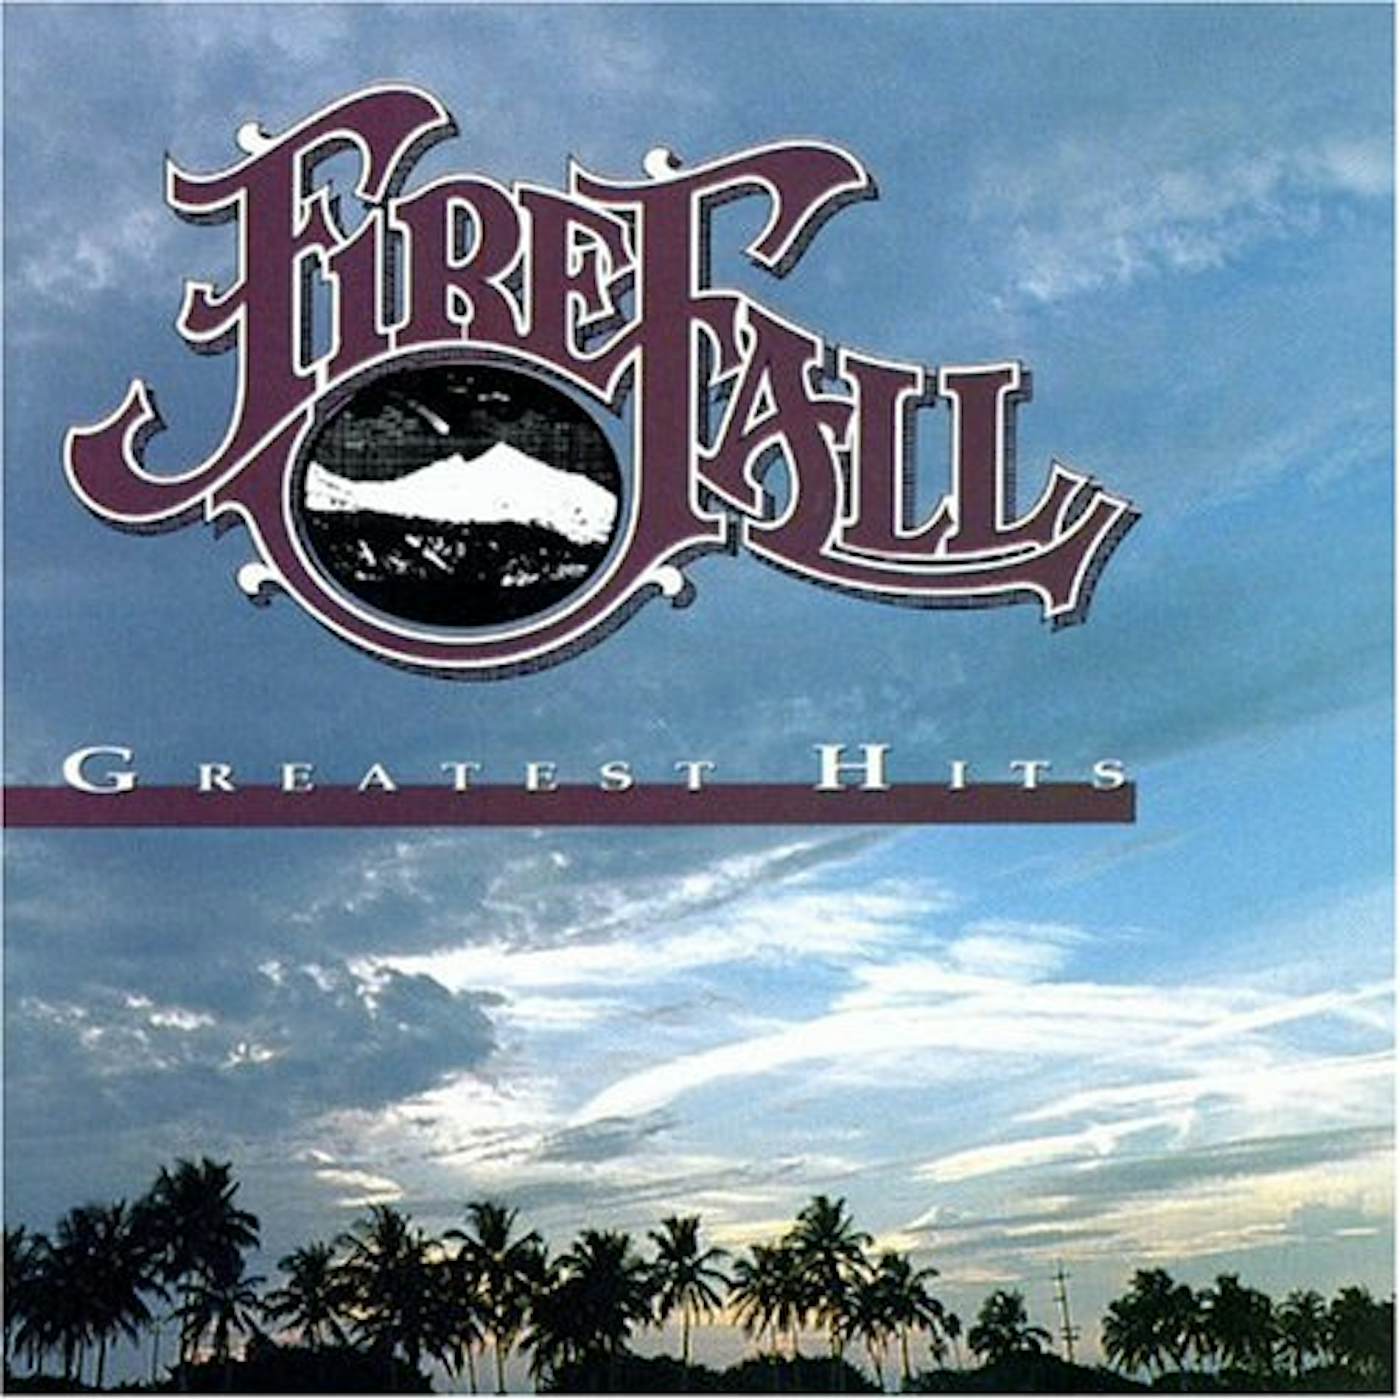 Firefall GREATEST HITS CD